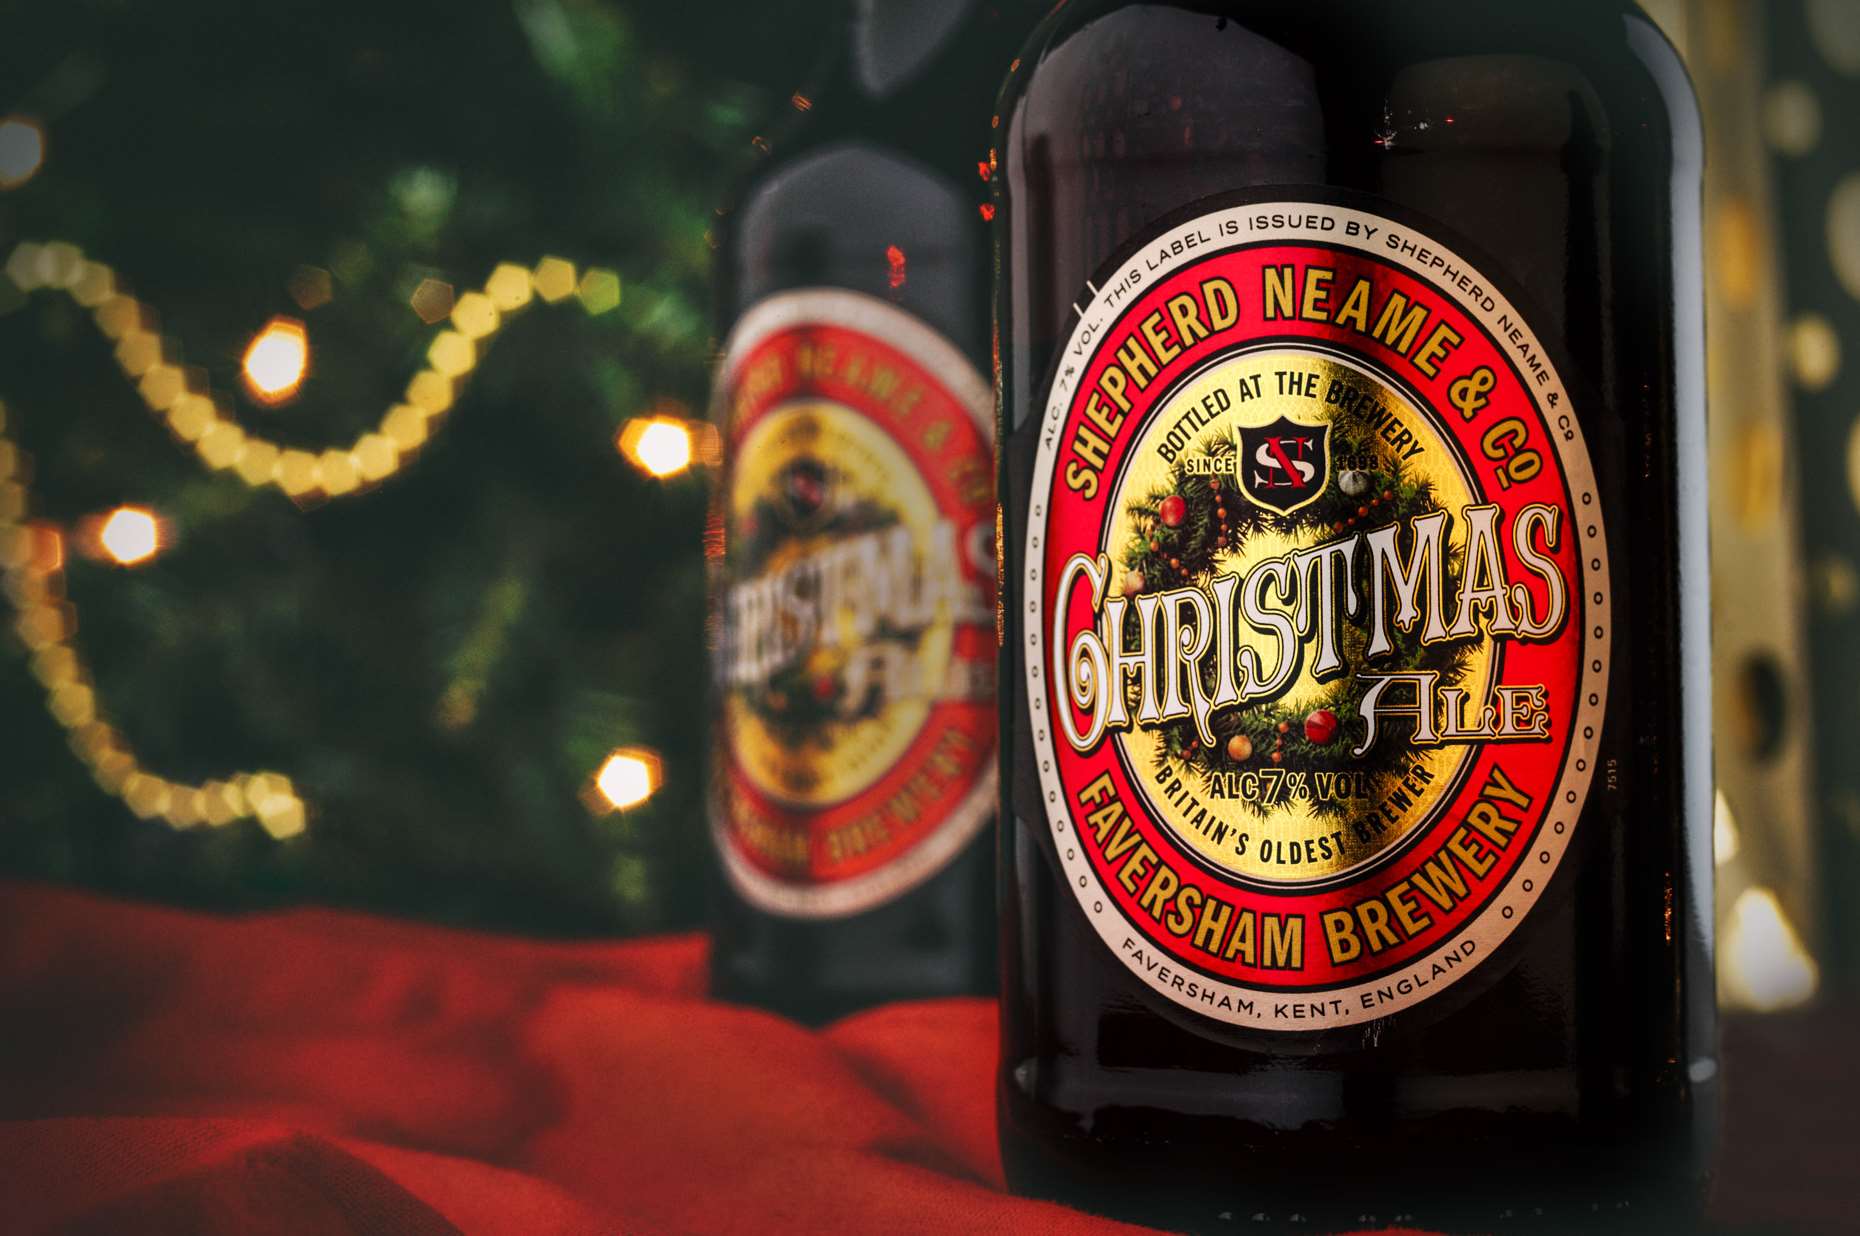 You could win some Shepherd Neame Christmas Ale